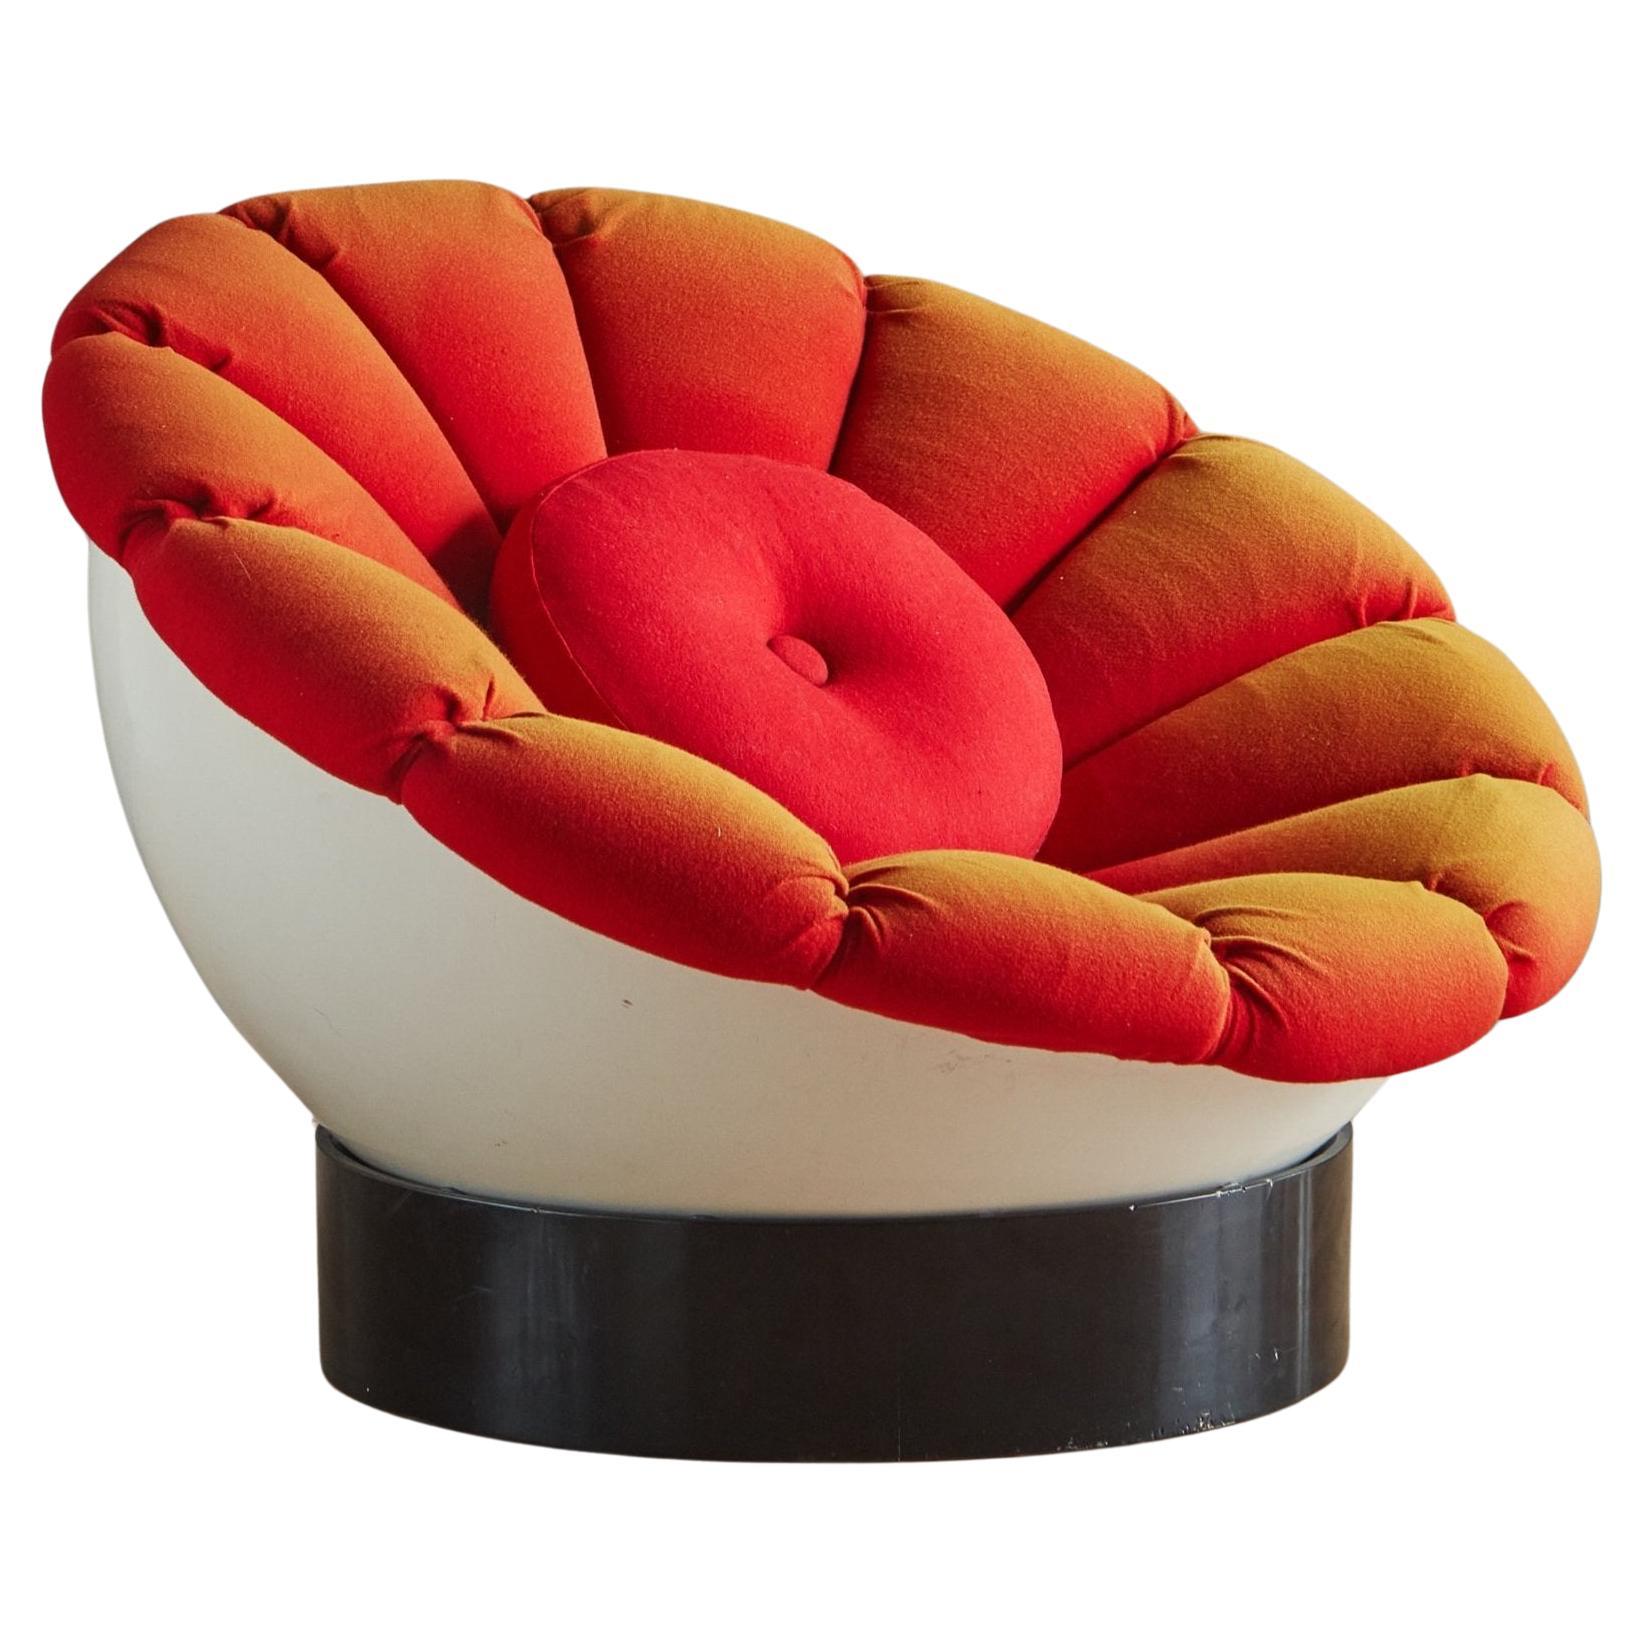 Fiberglass ‘Girasole’ Chair with Pillow by Luciano Frigerio, Italy 1960s For Sale